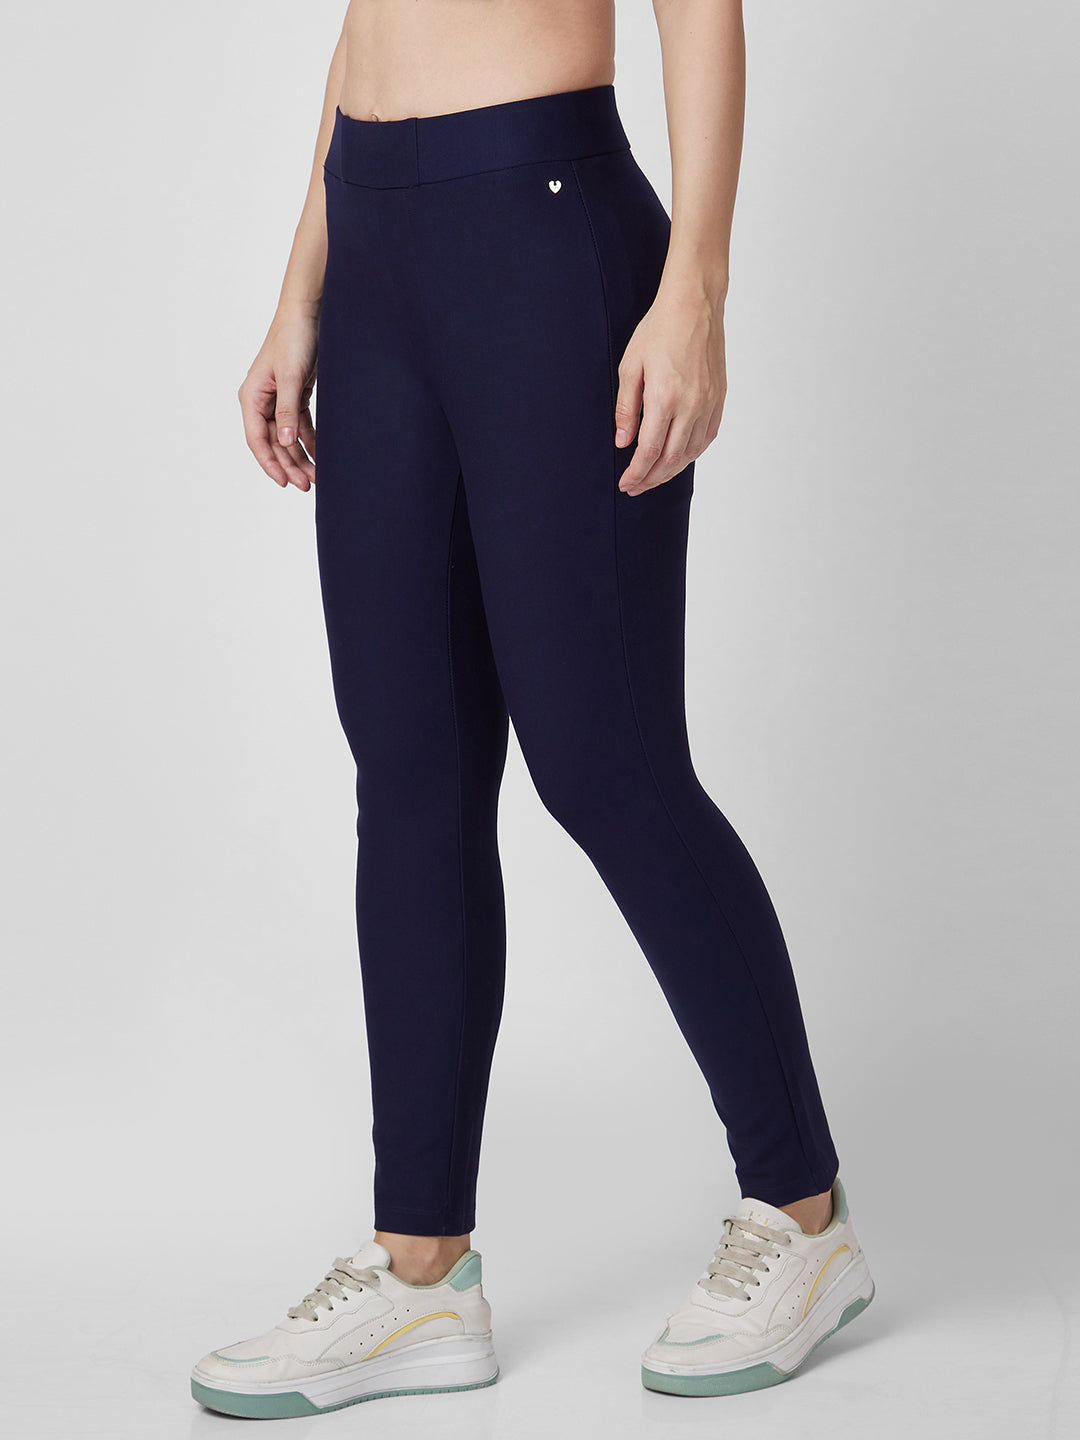 Spykar High Rise Skinny Fit Blue Knits Pant For Women